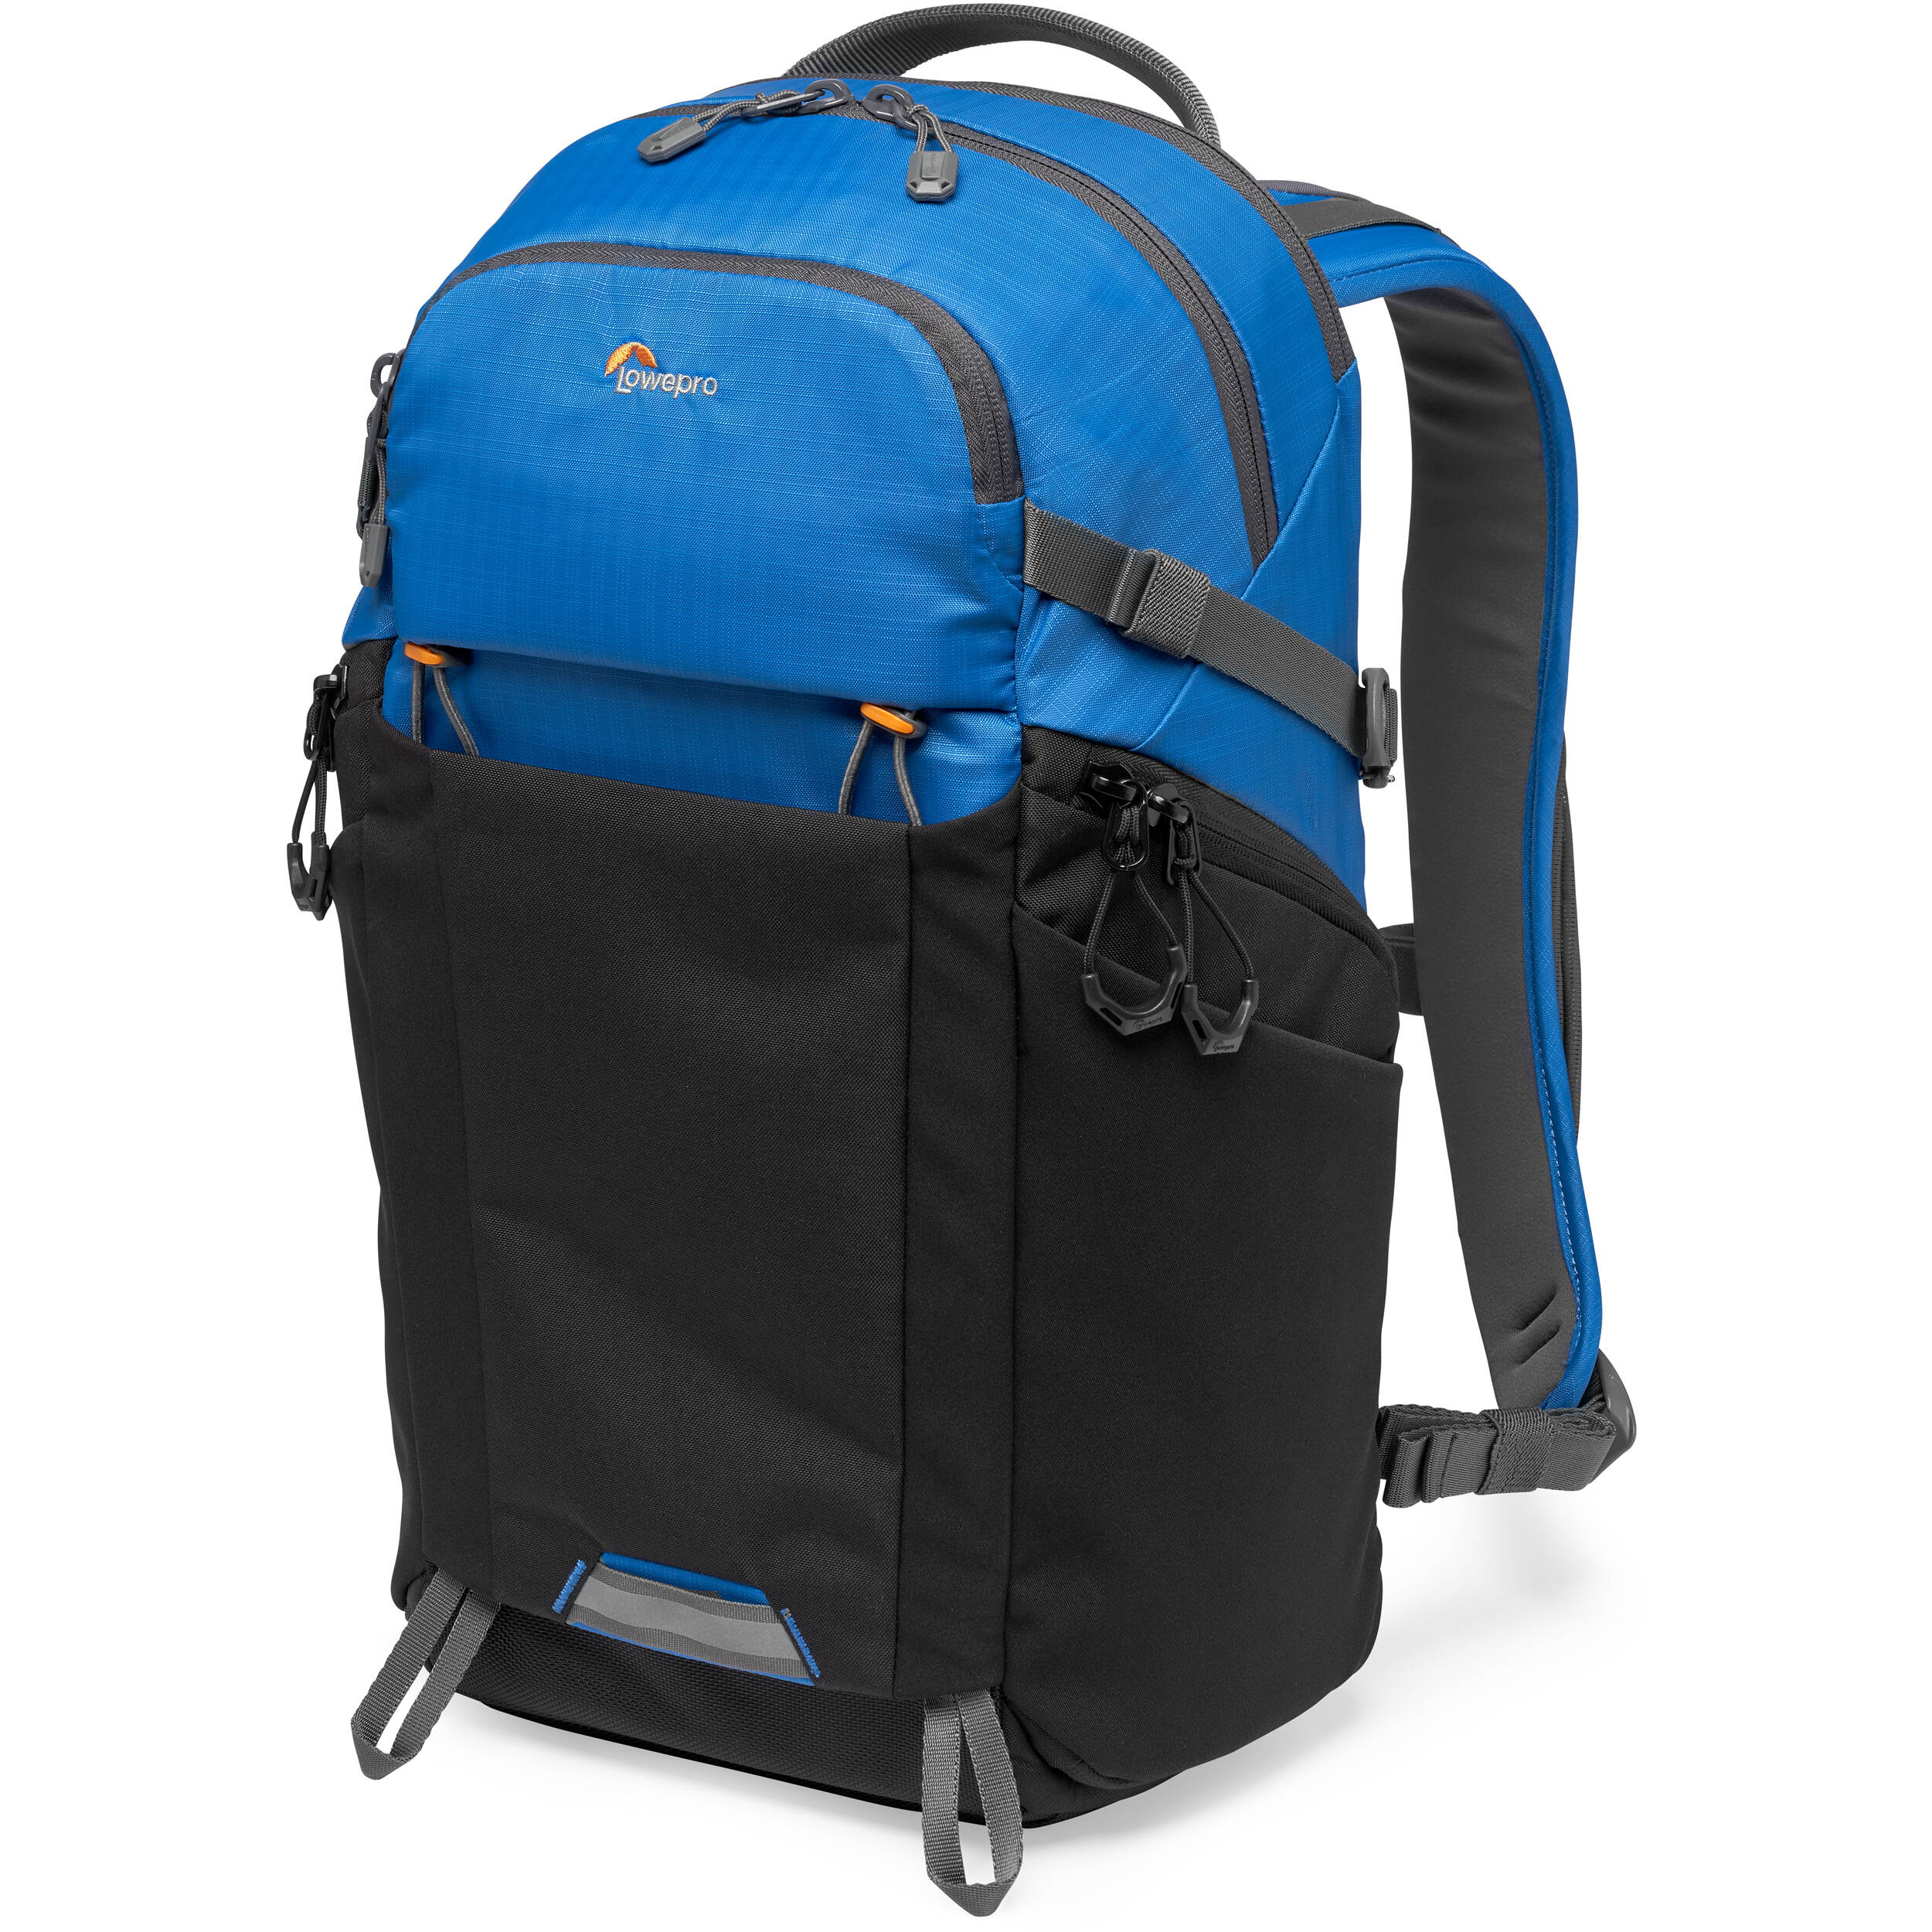 Lowepro Photo Active BP Backpack - 200 AW / Blue